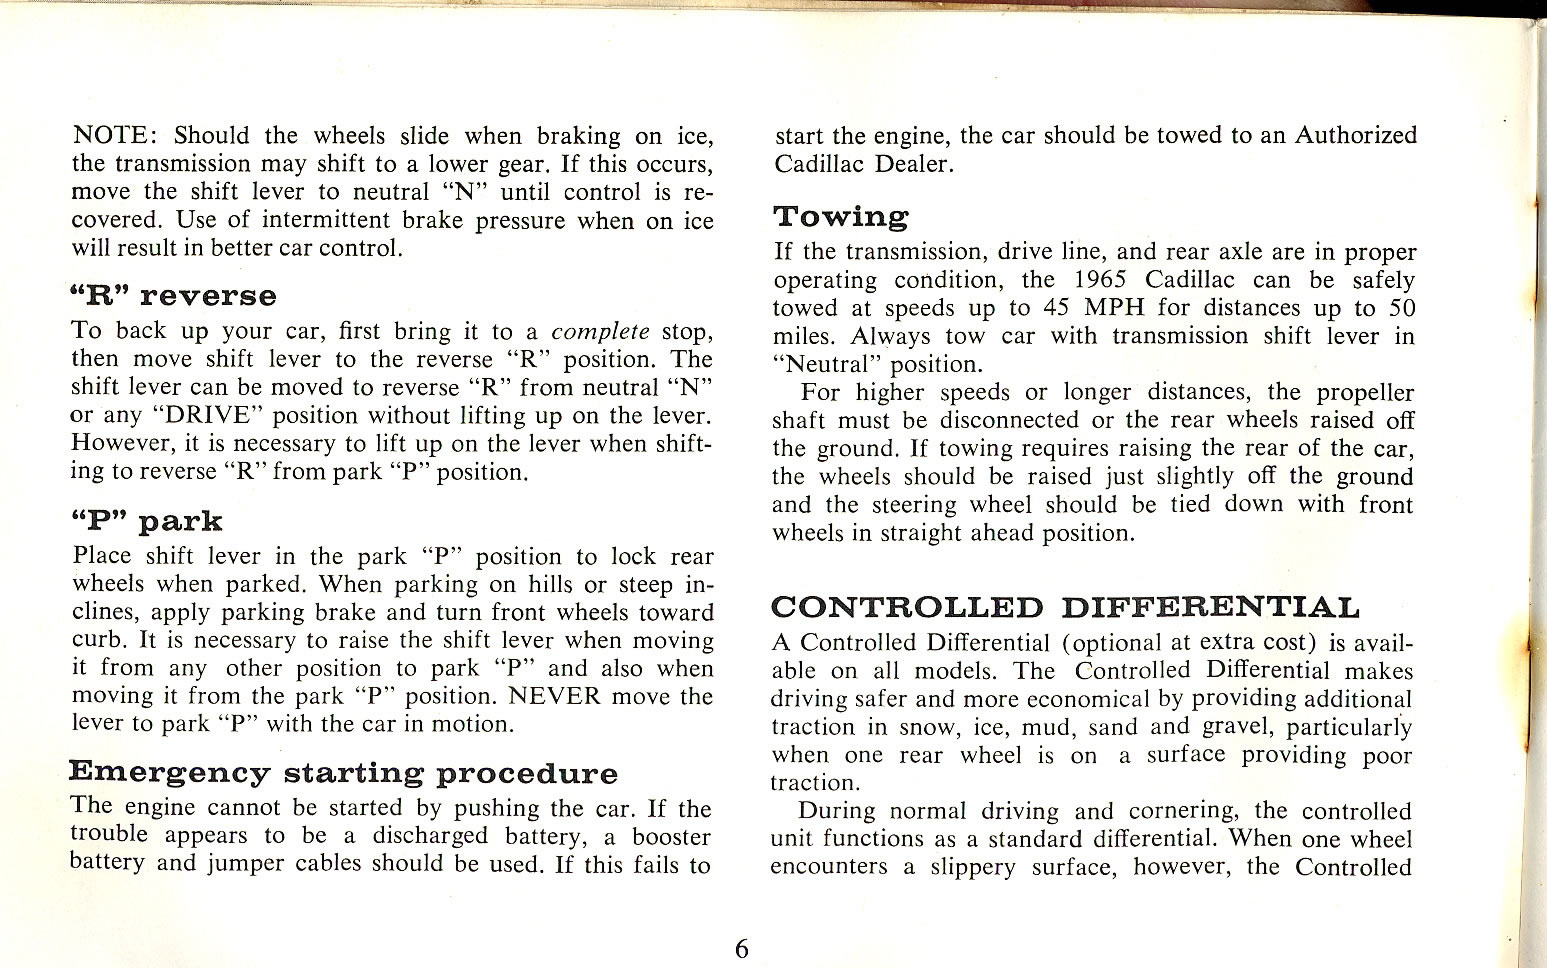 1965 Cadillac Owners Manual Page 7